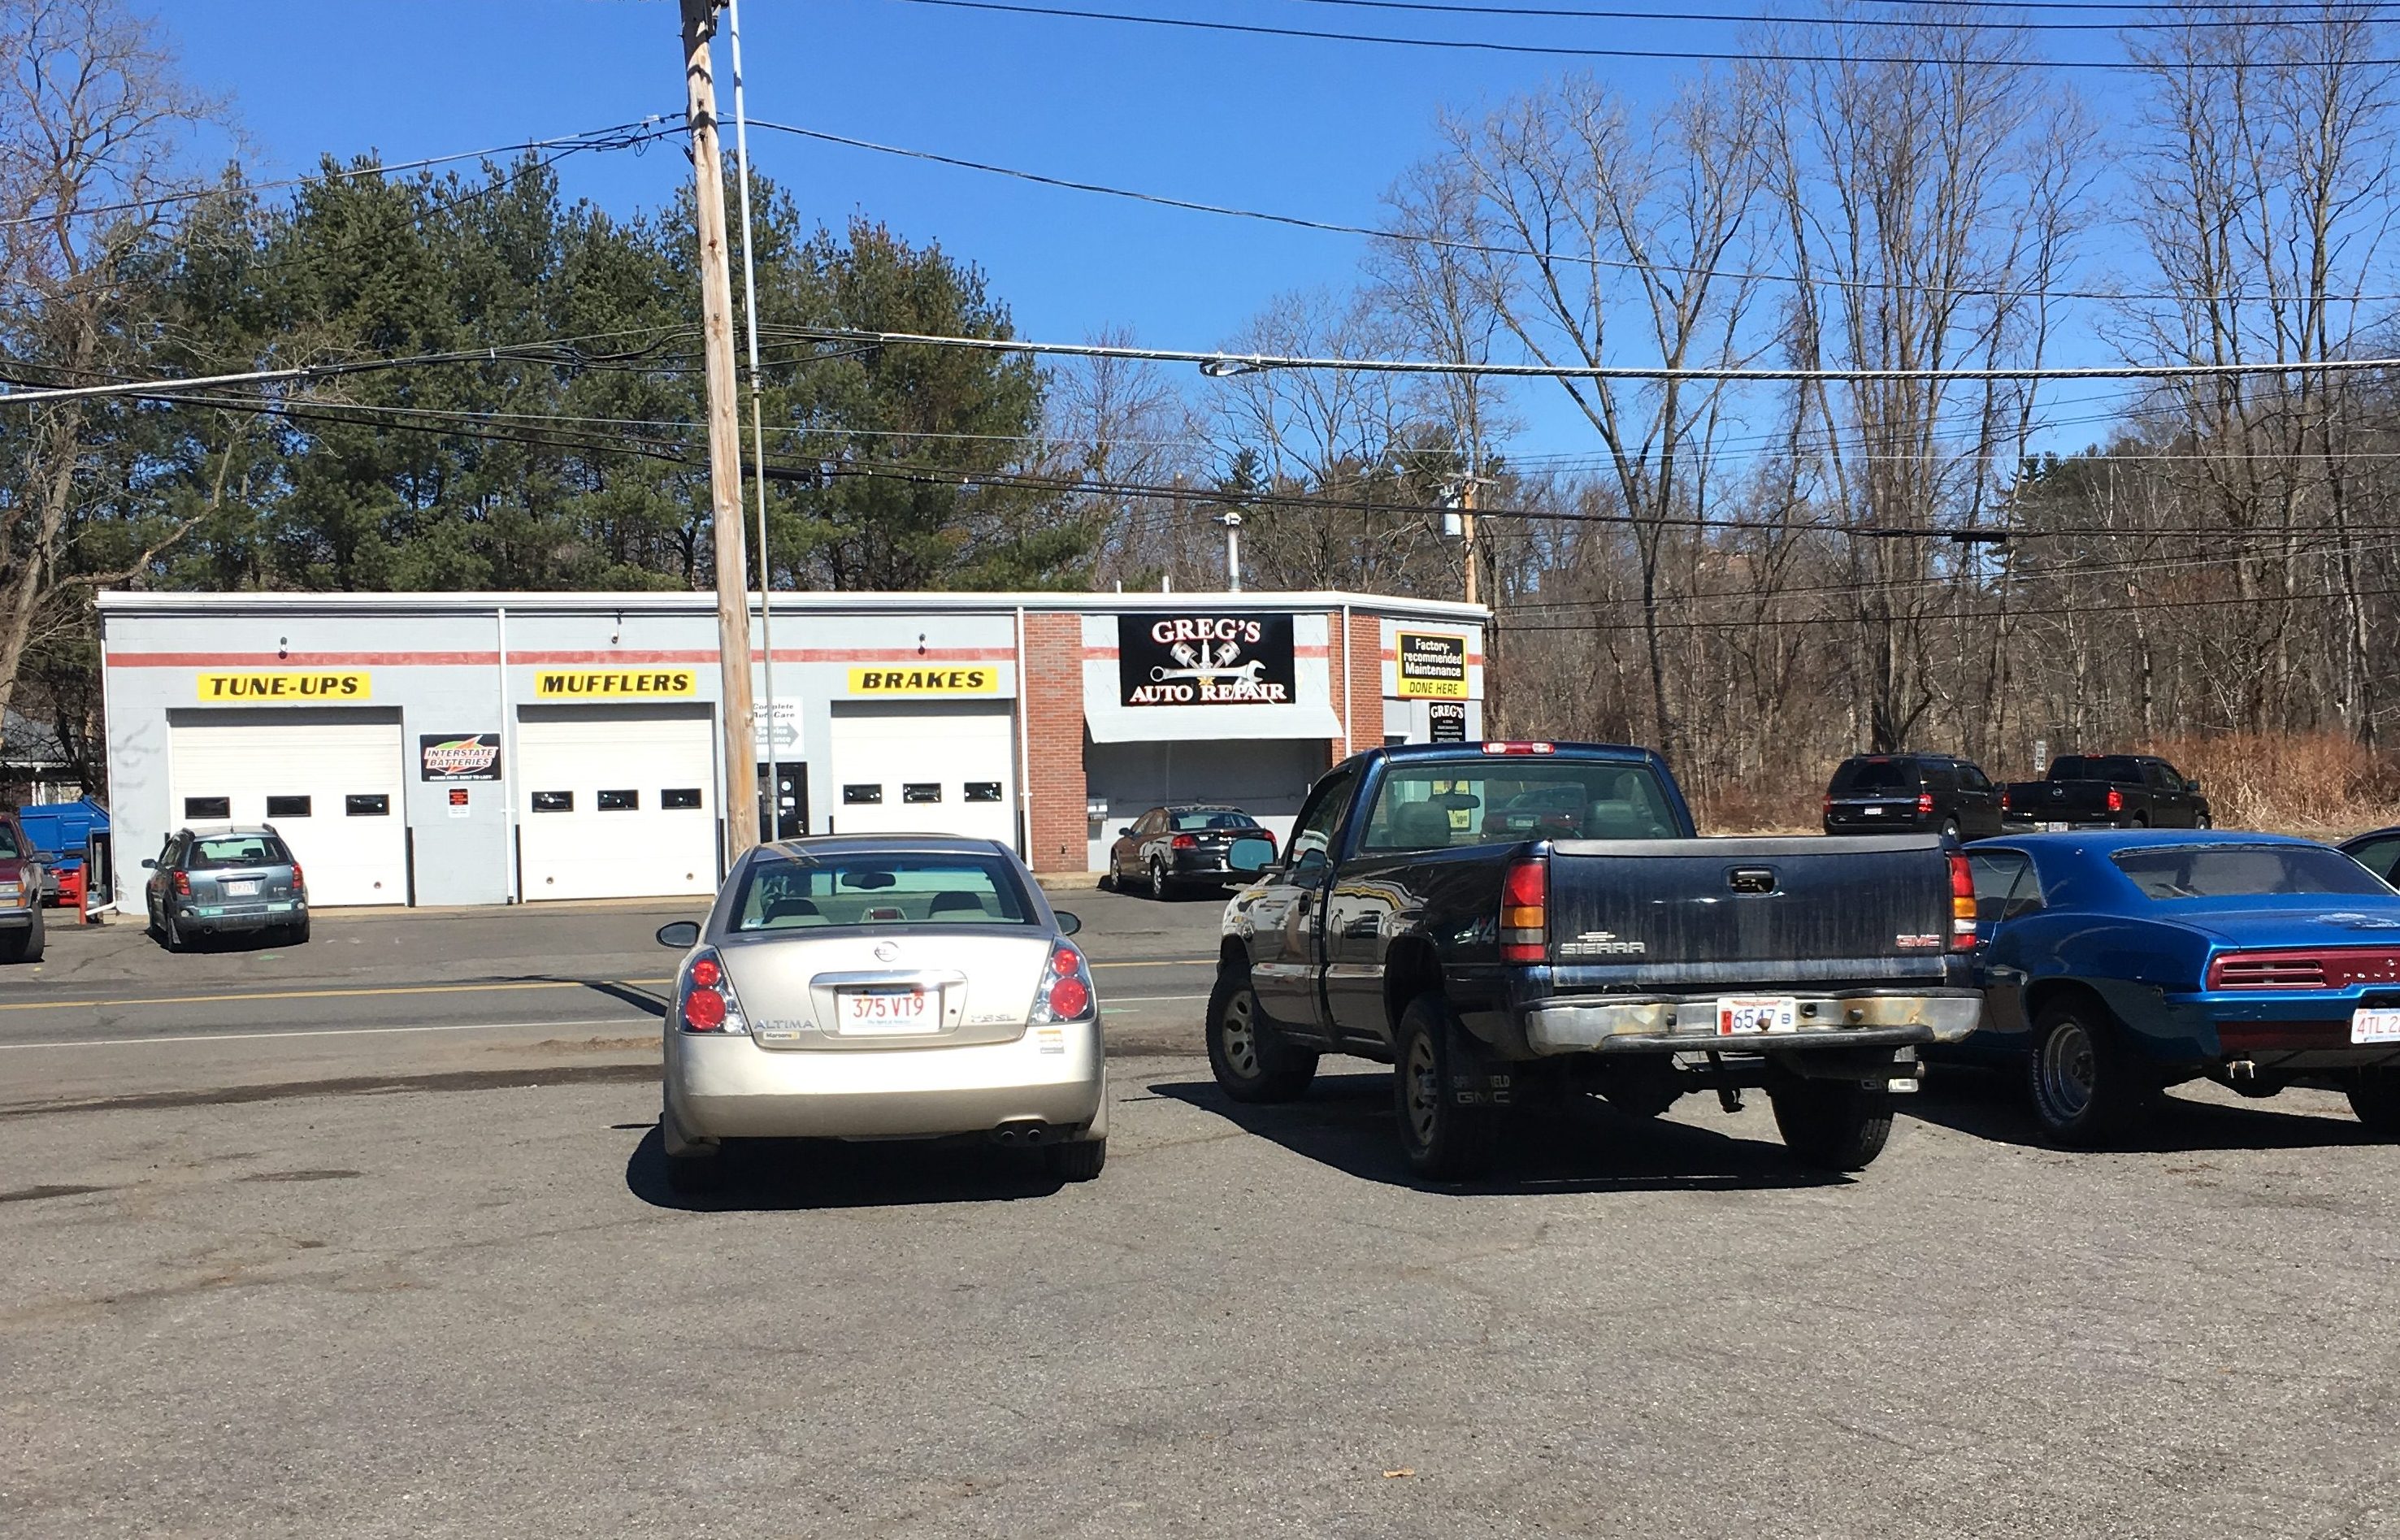 Audio: Northampton dispatcher appears to give auto shop owner the OK to tow cars during march